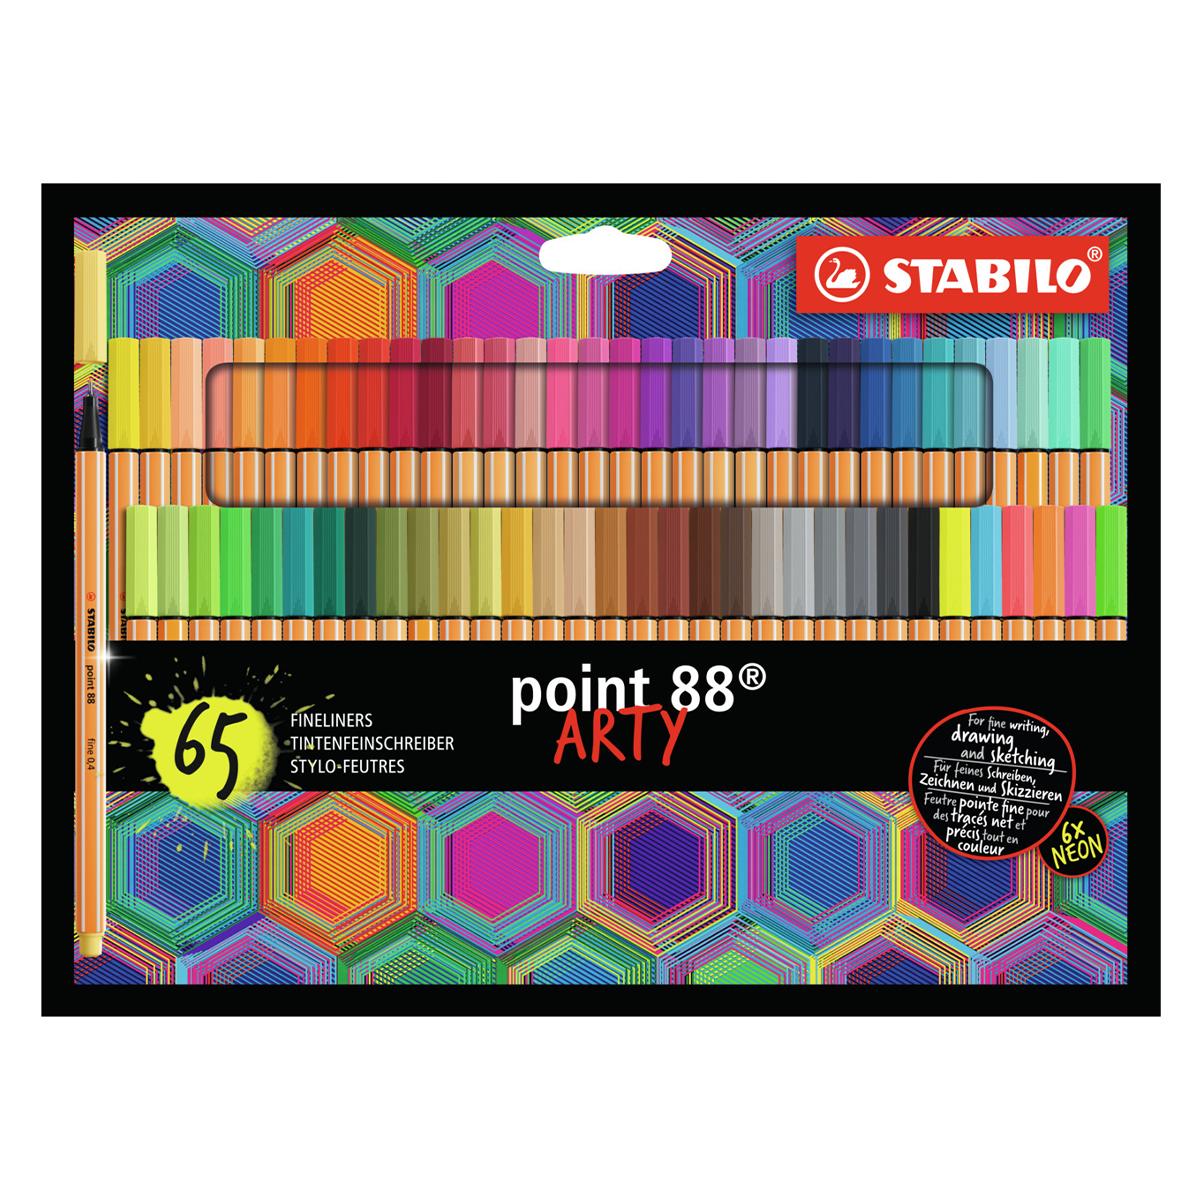 Fineliner STABILO point 88 - pack of 12 pastel colors